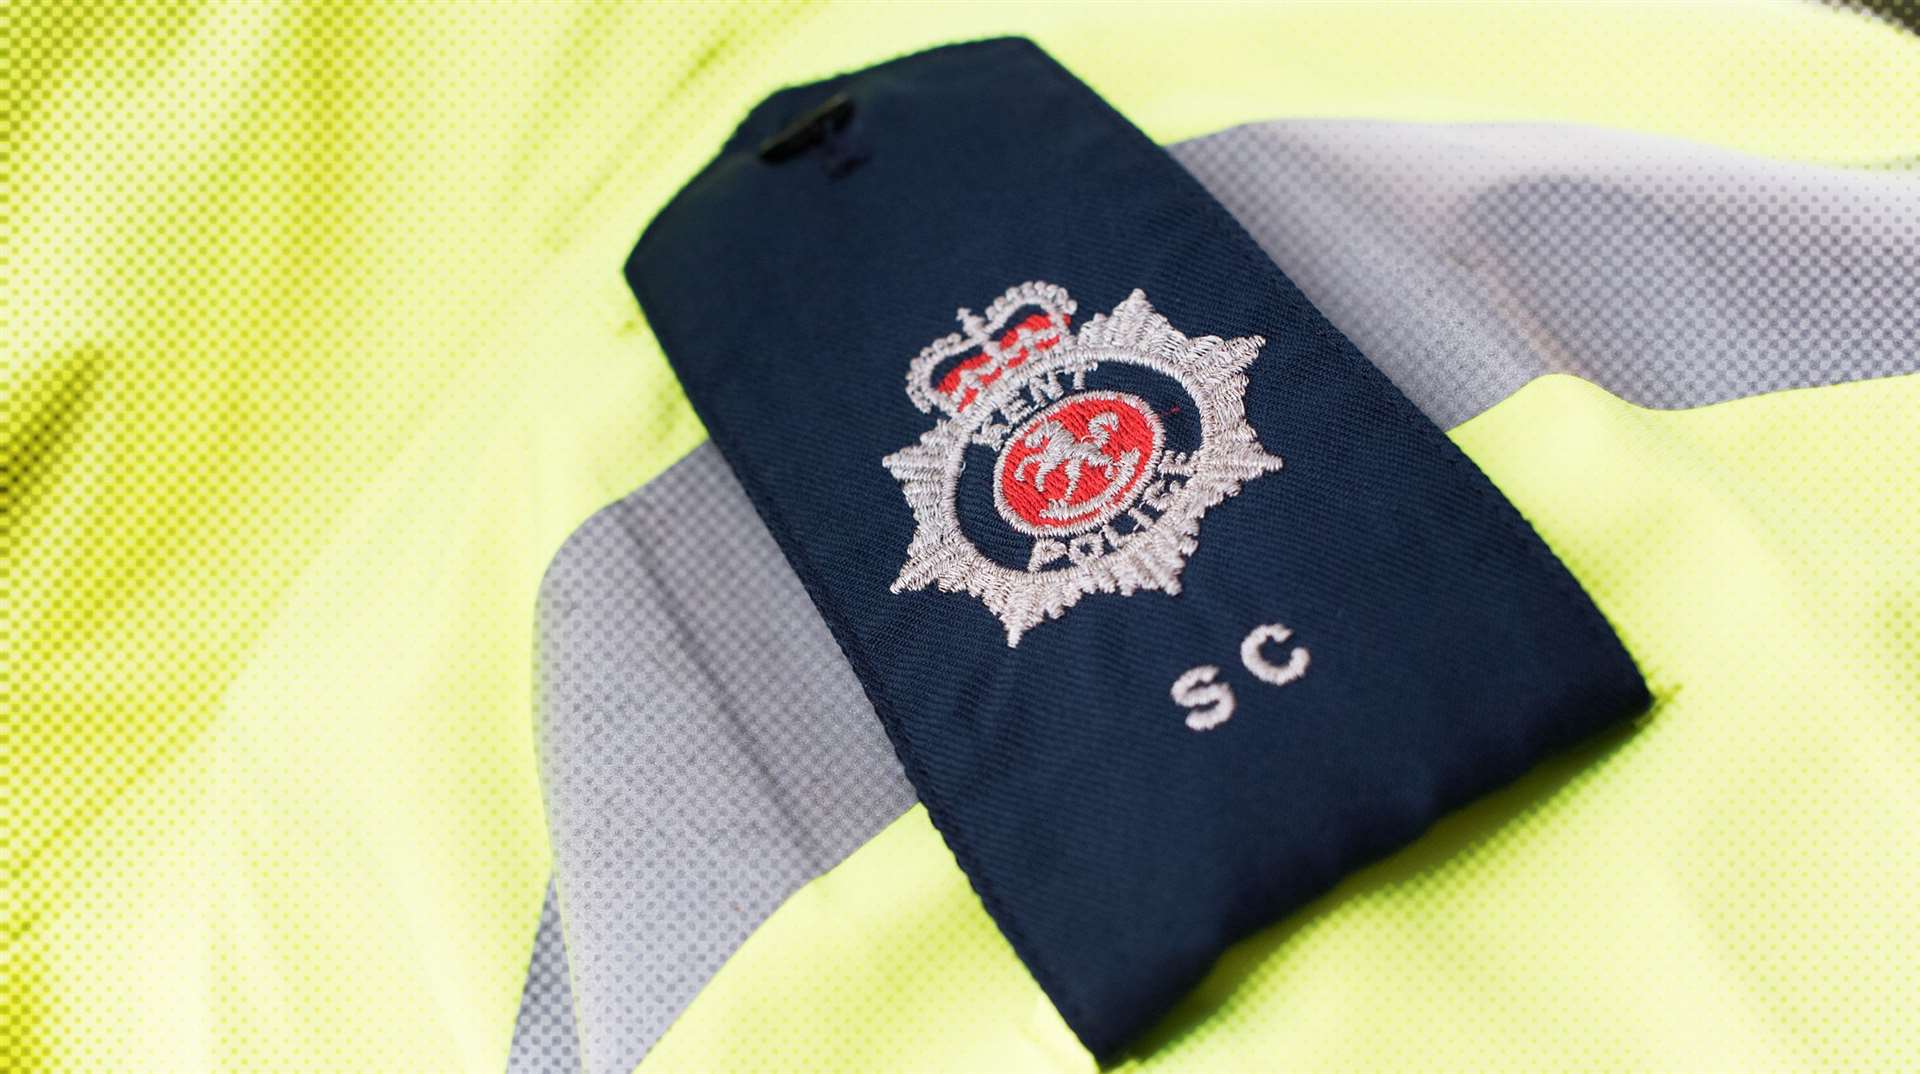 Do you think you’ve got what it takes to be a special constable?